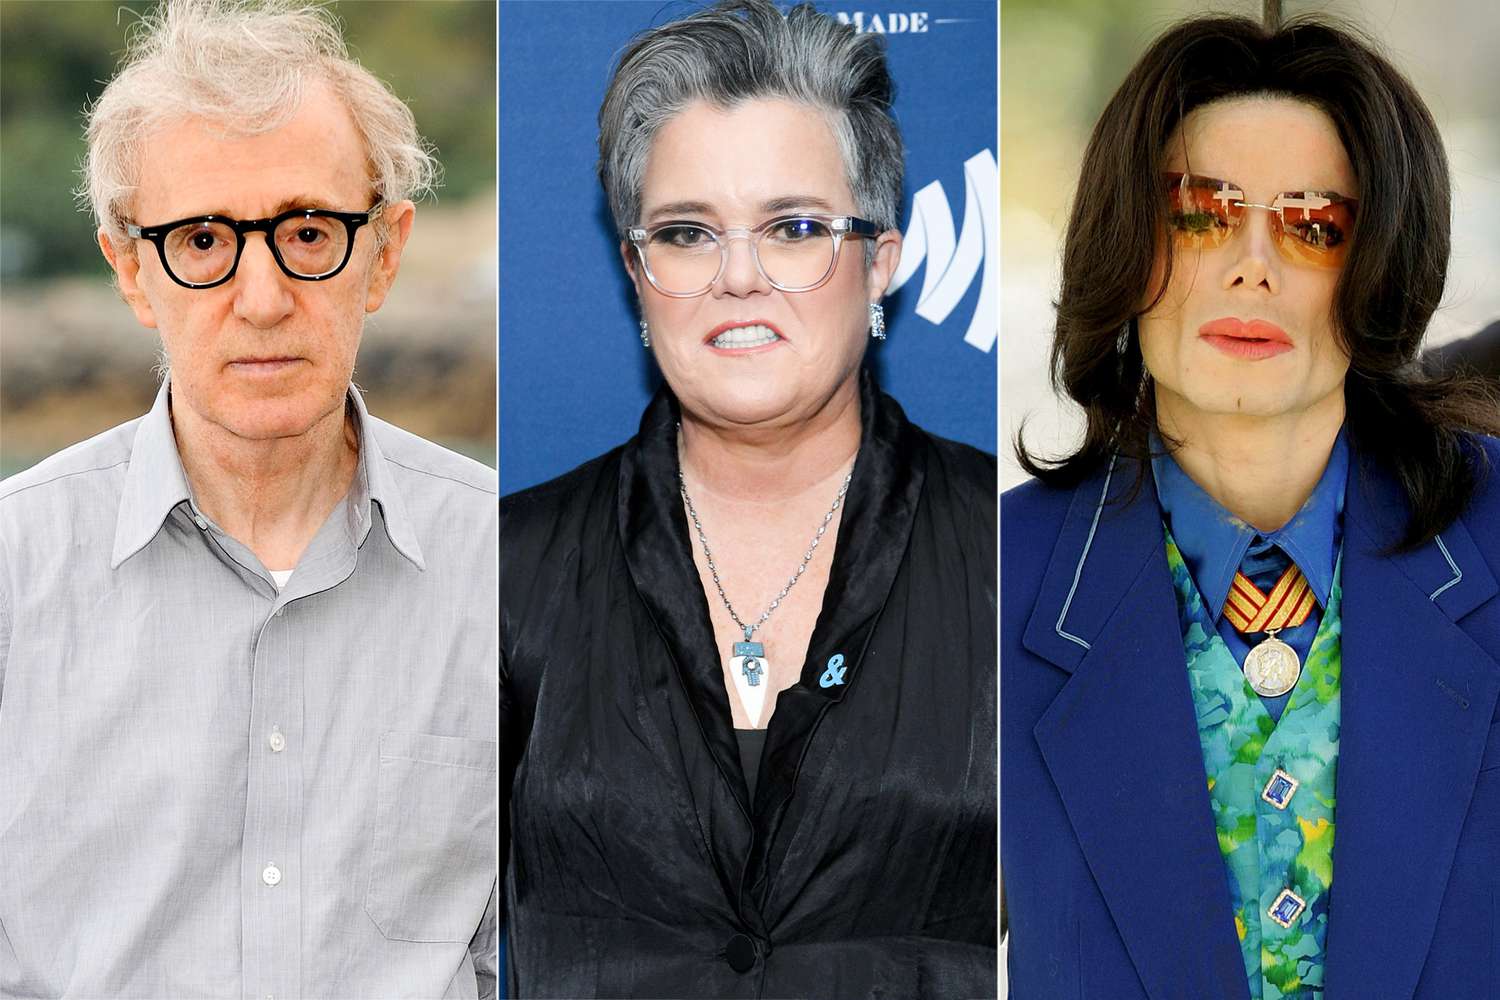 Rosie O'Donnell turned away Woody Allen, Michael Jackson over allegations